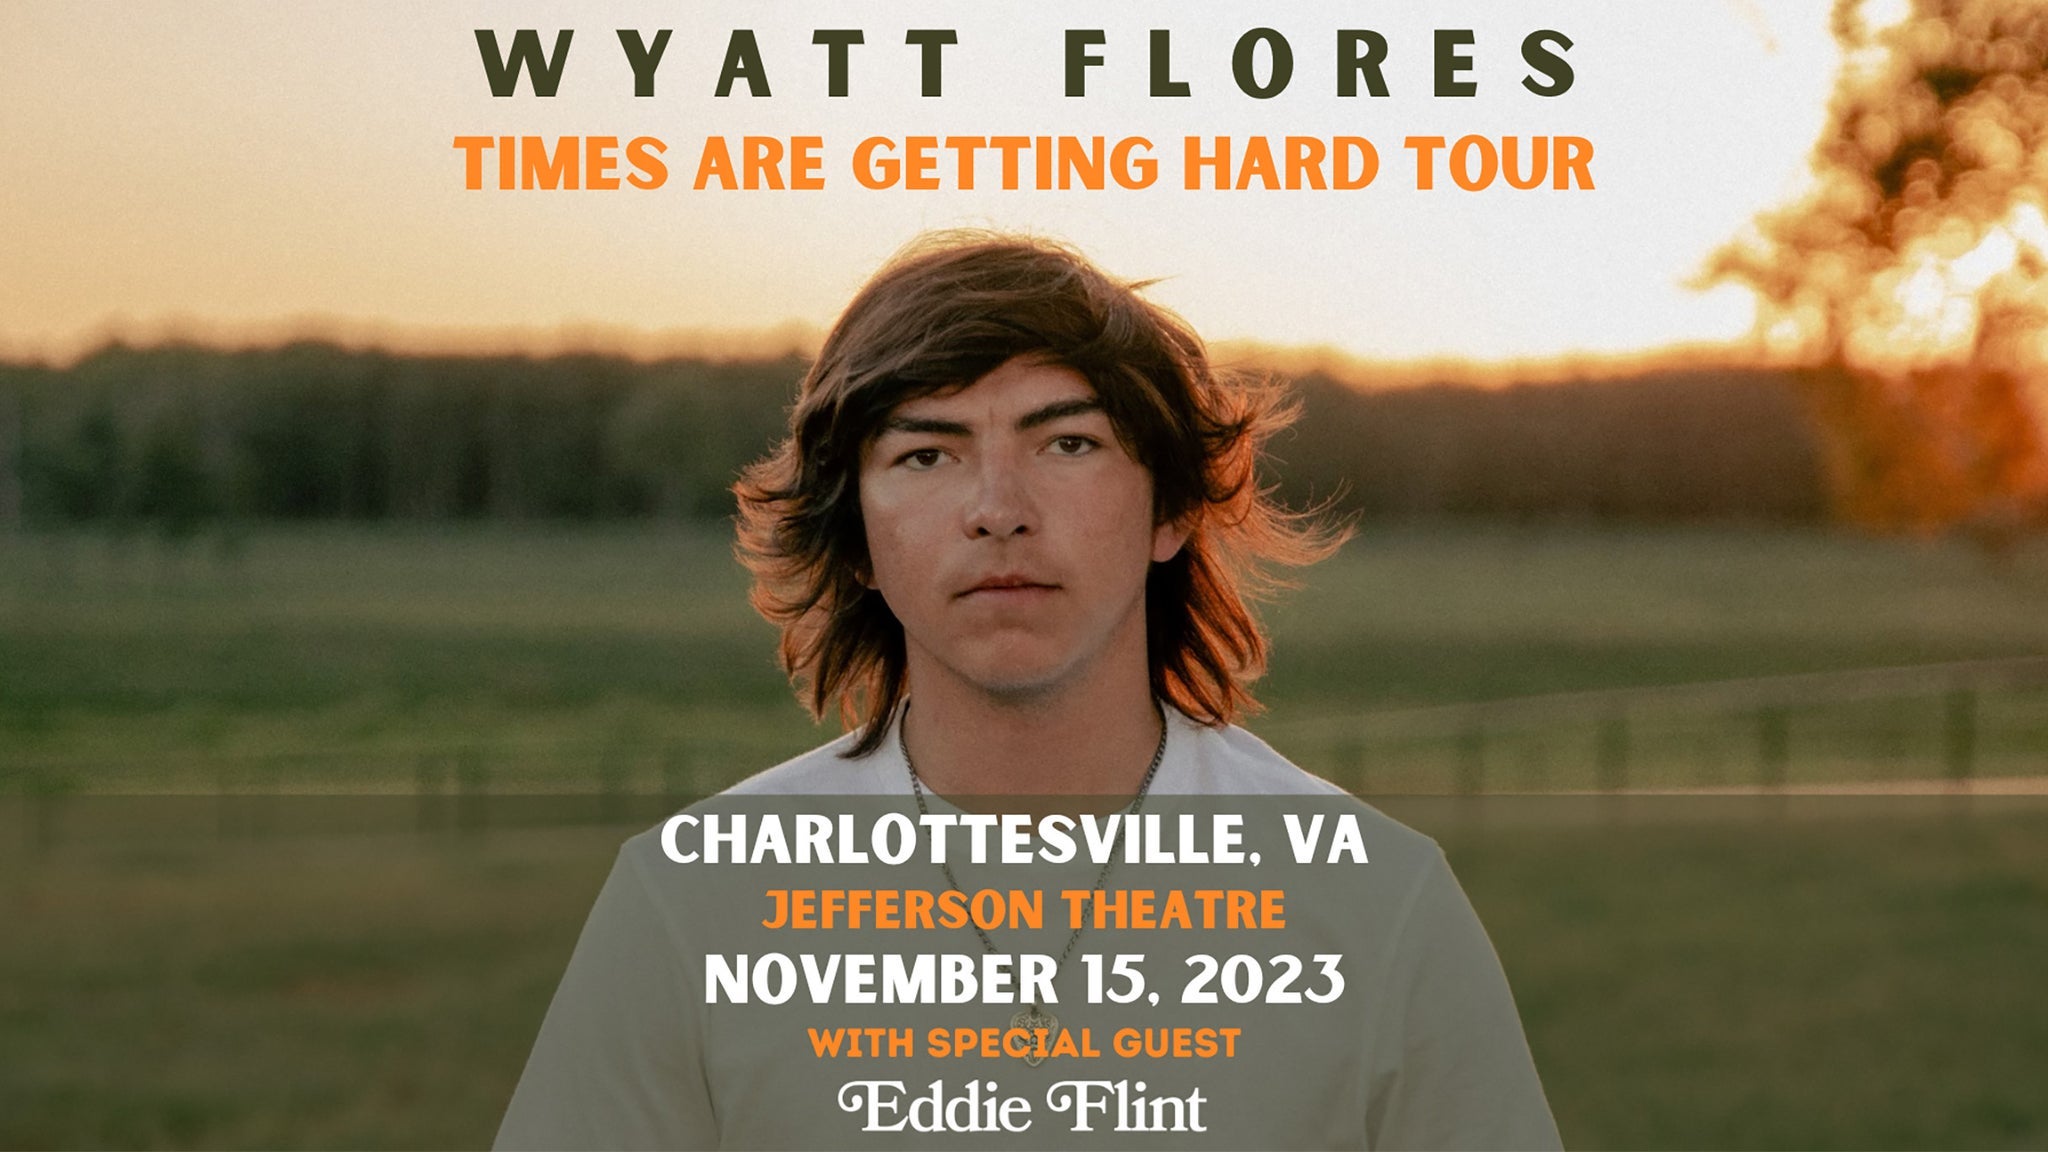 Wyatt Flores presale code for approved tickets in Charlottesville